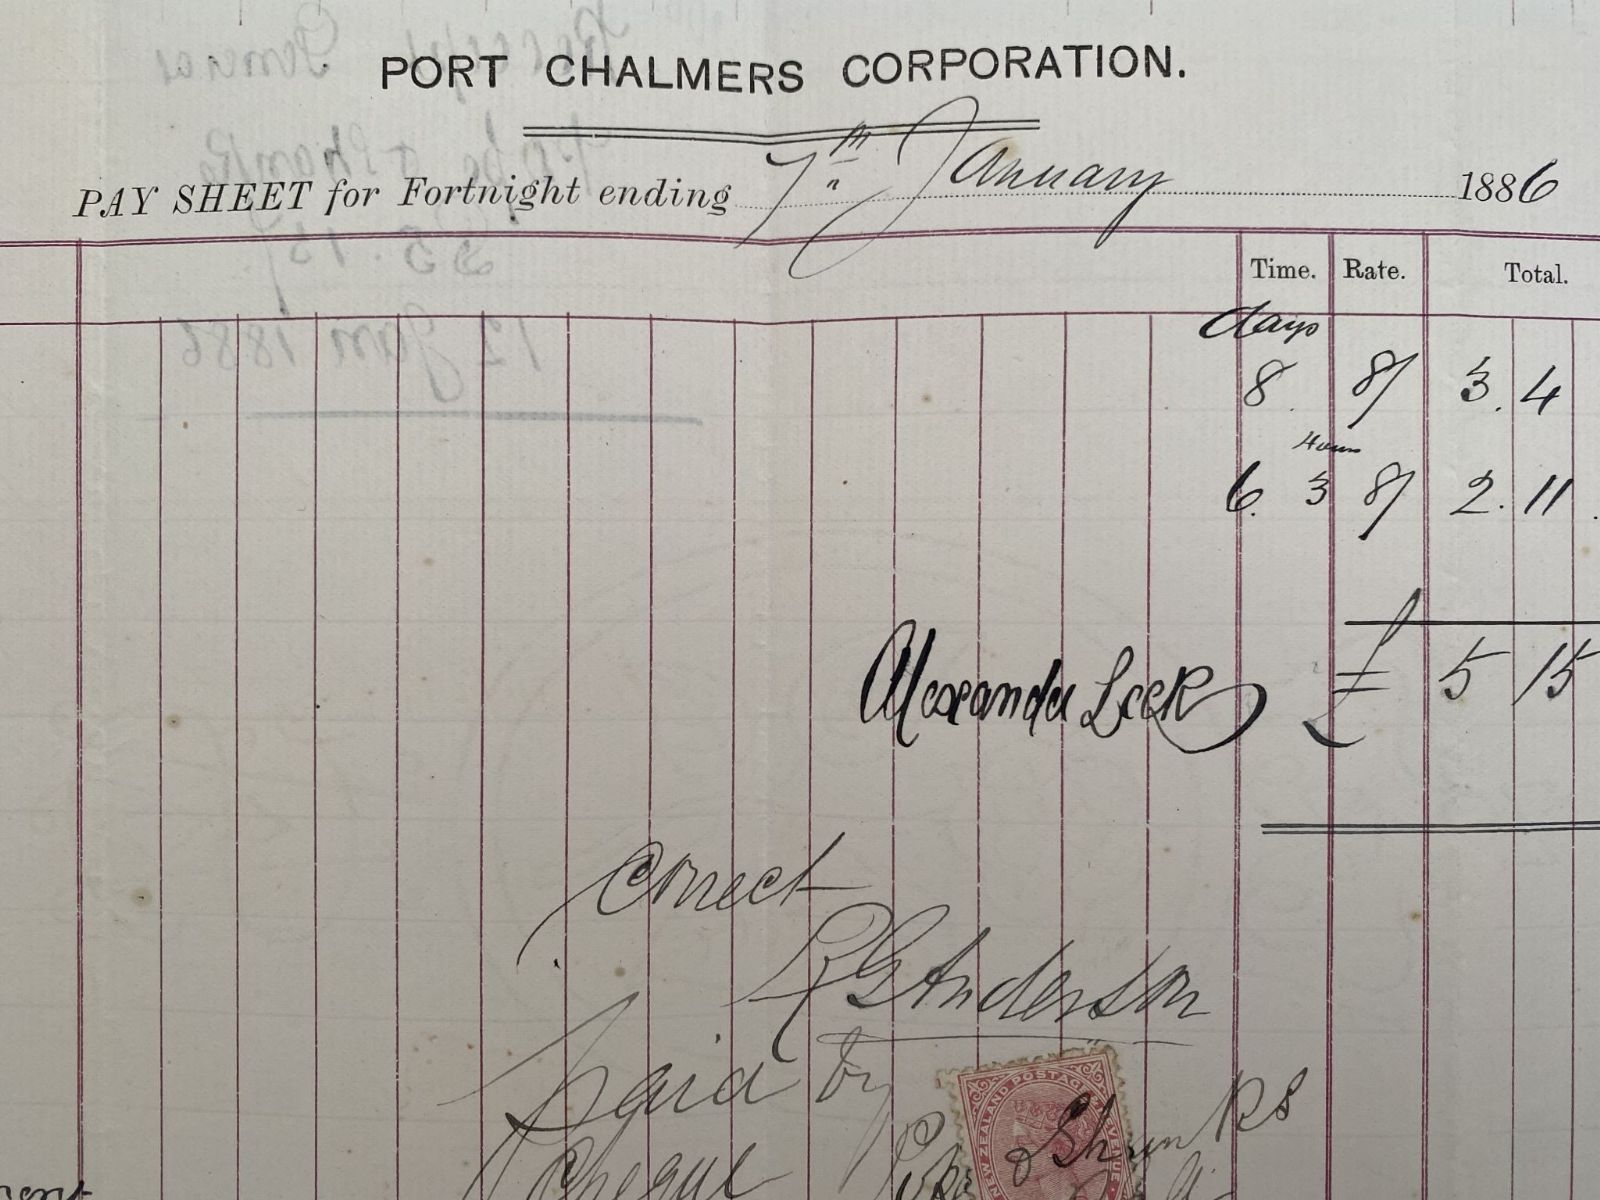 ANTIQUE PAY SHEET: Port Chalmers Corporation 1886